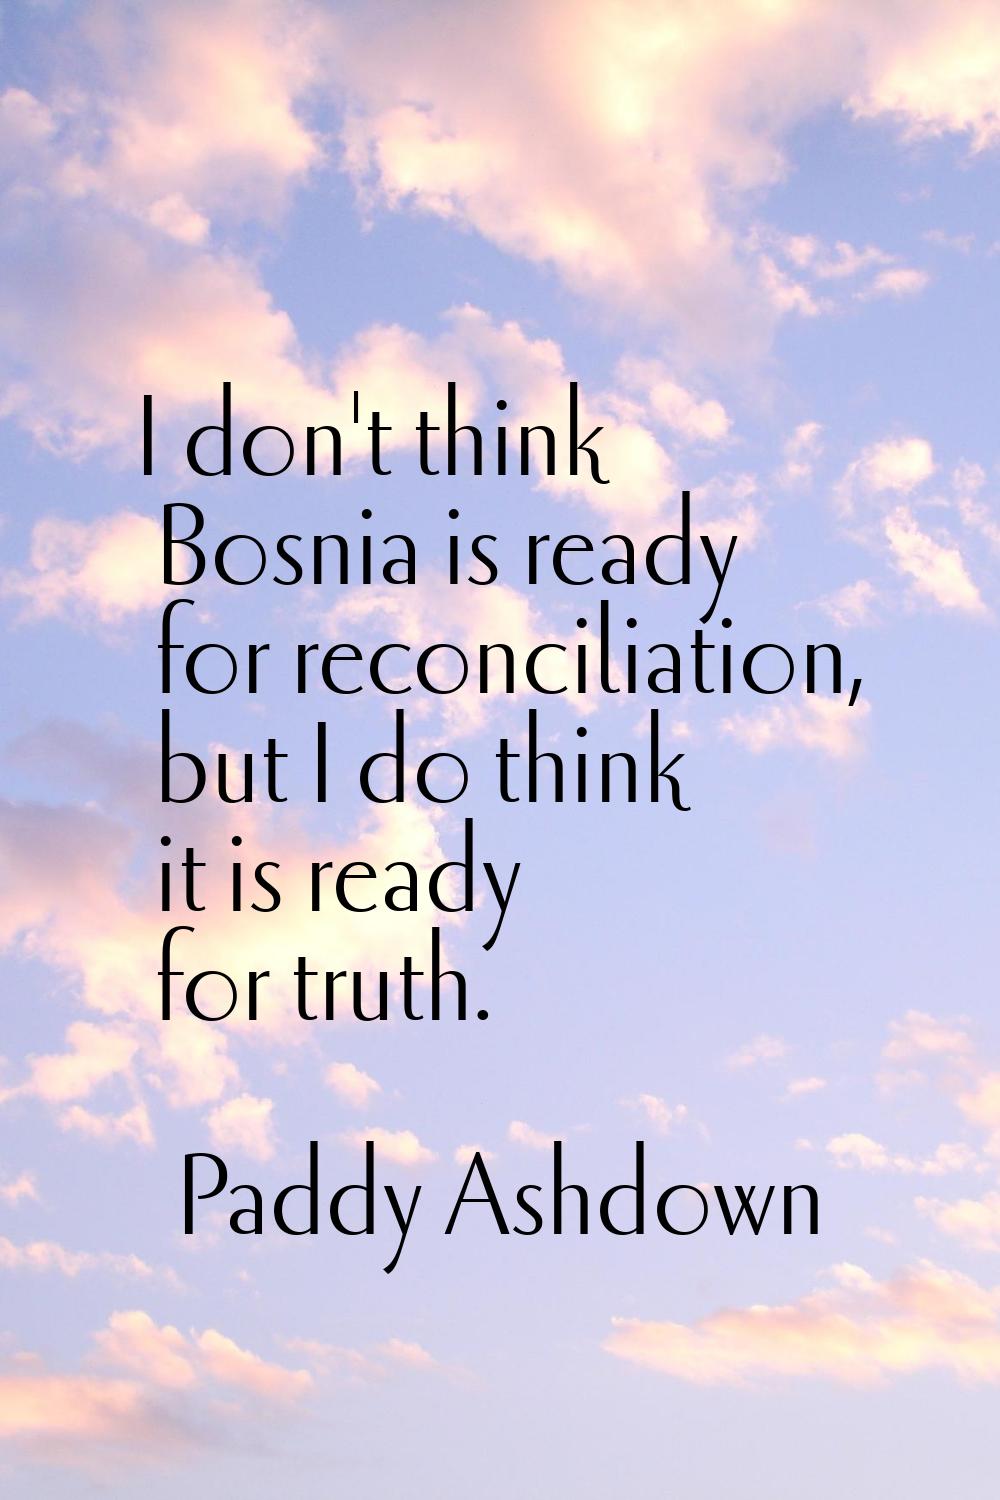 I don't think Bosnia is ready for reconciliation, but I do think it is ready for truth.